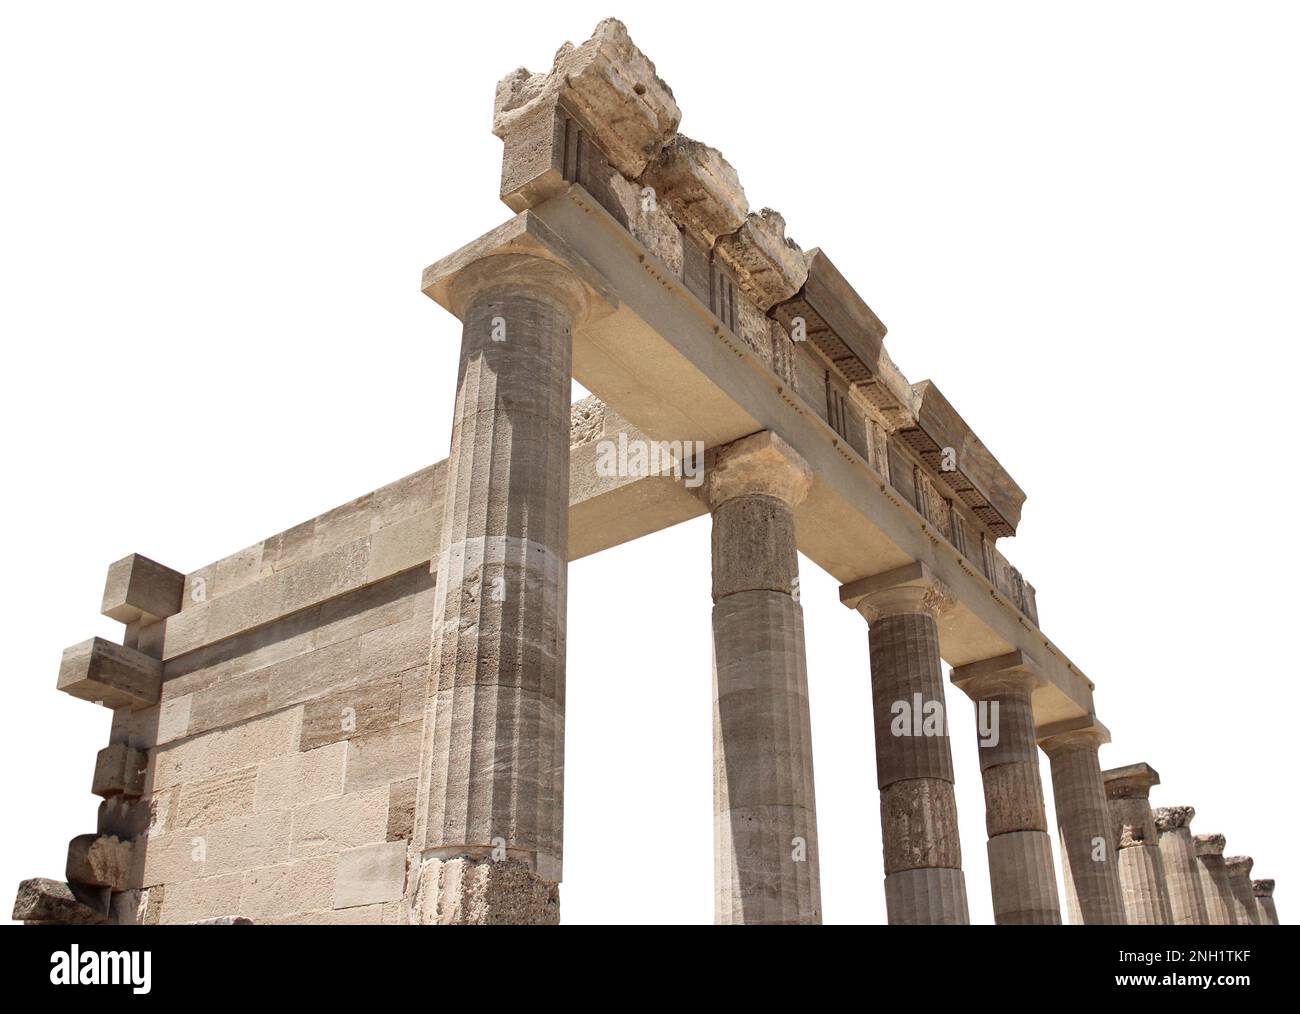 Ancient Greek antique temple facade stone ruins and columns isolated Stock Photo